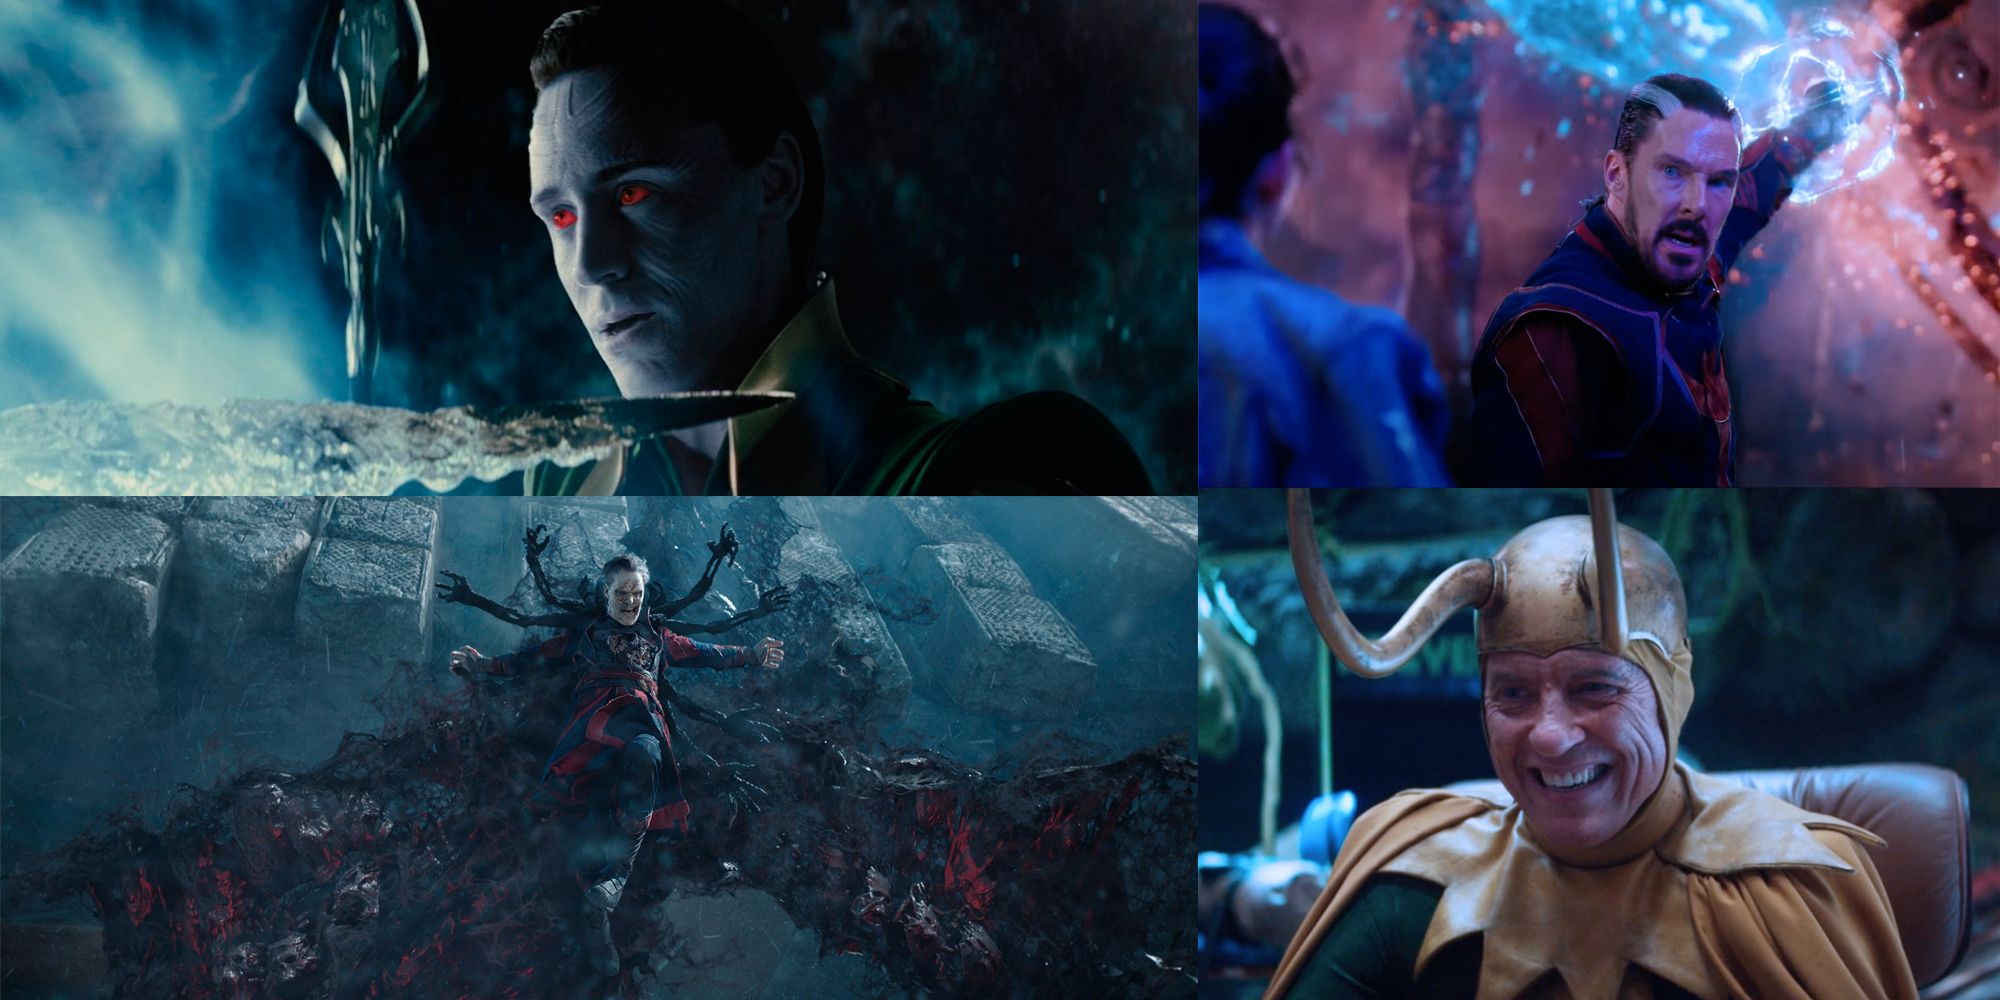 dr. strange floats with multiple hands protruding from his body